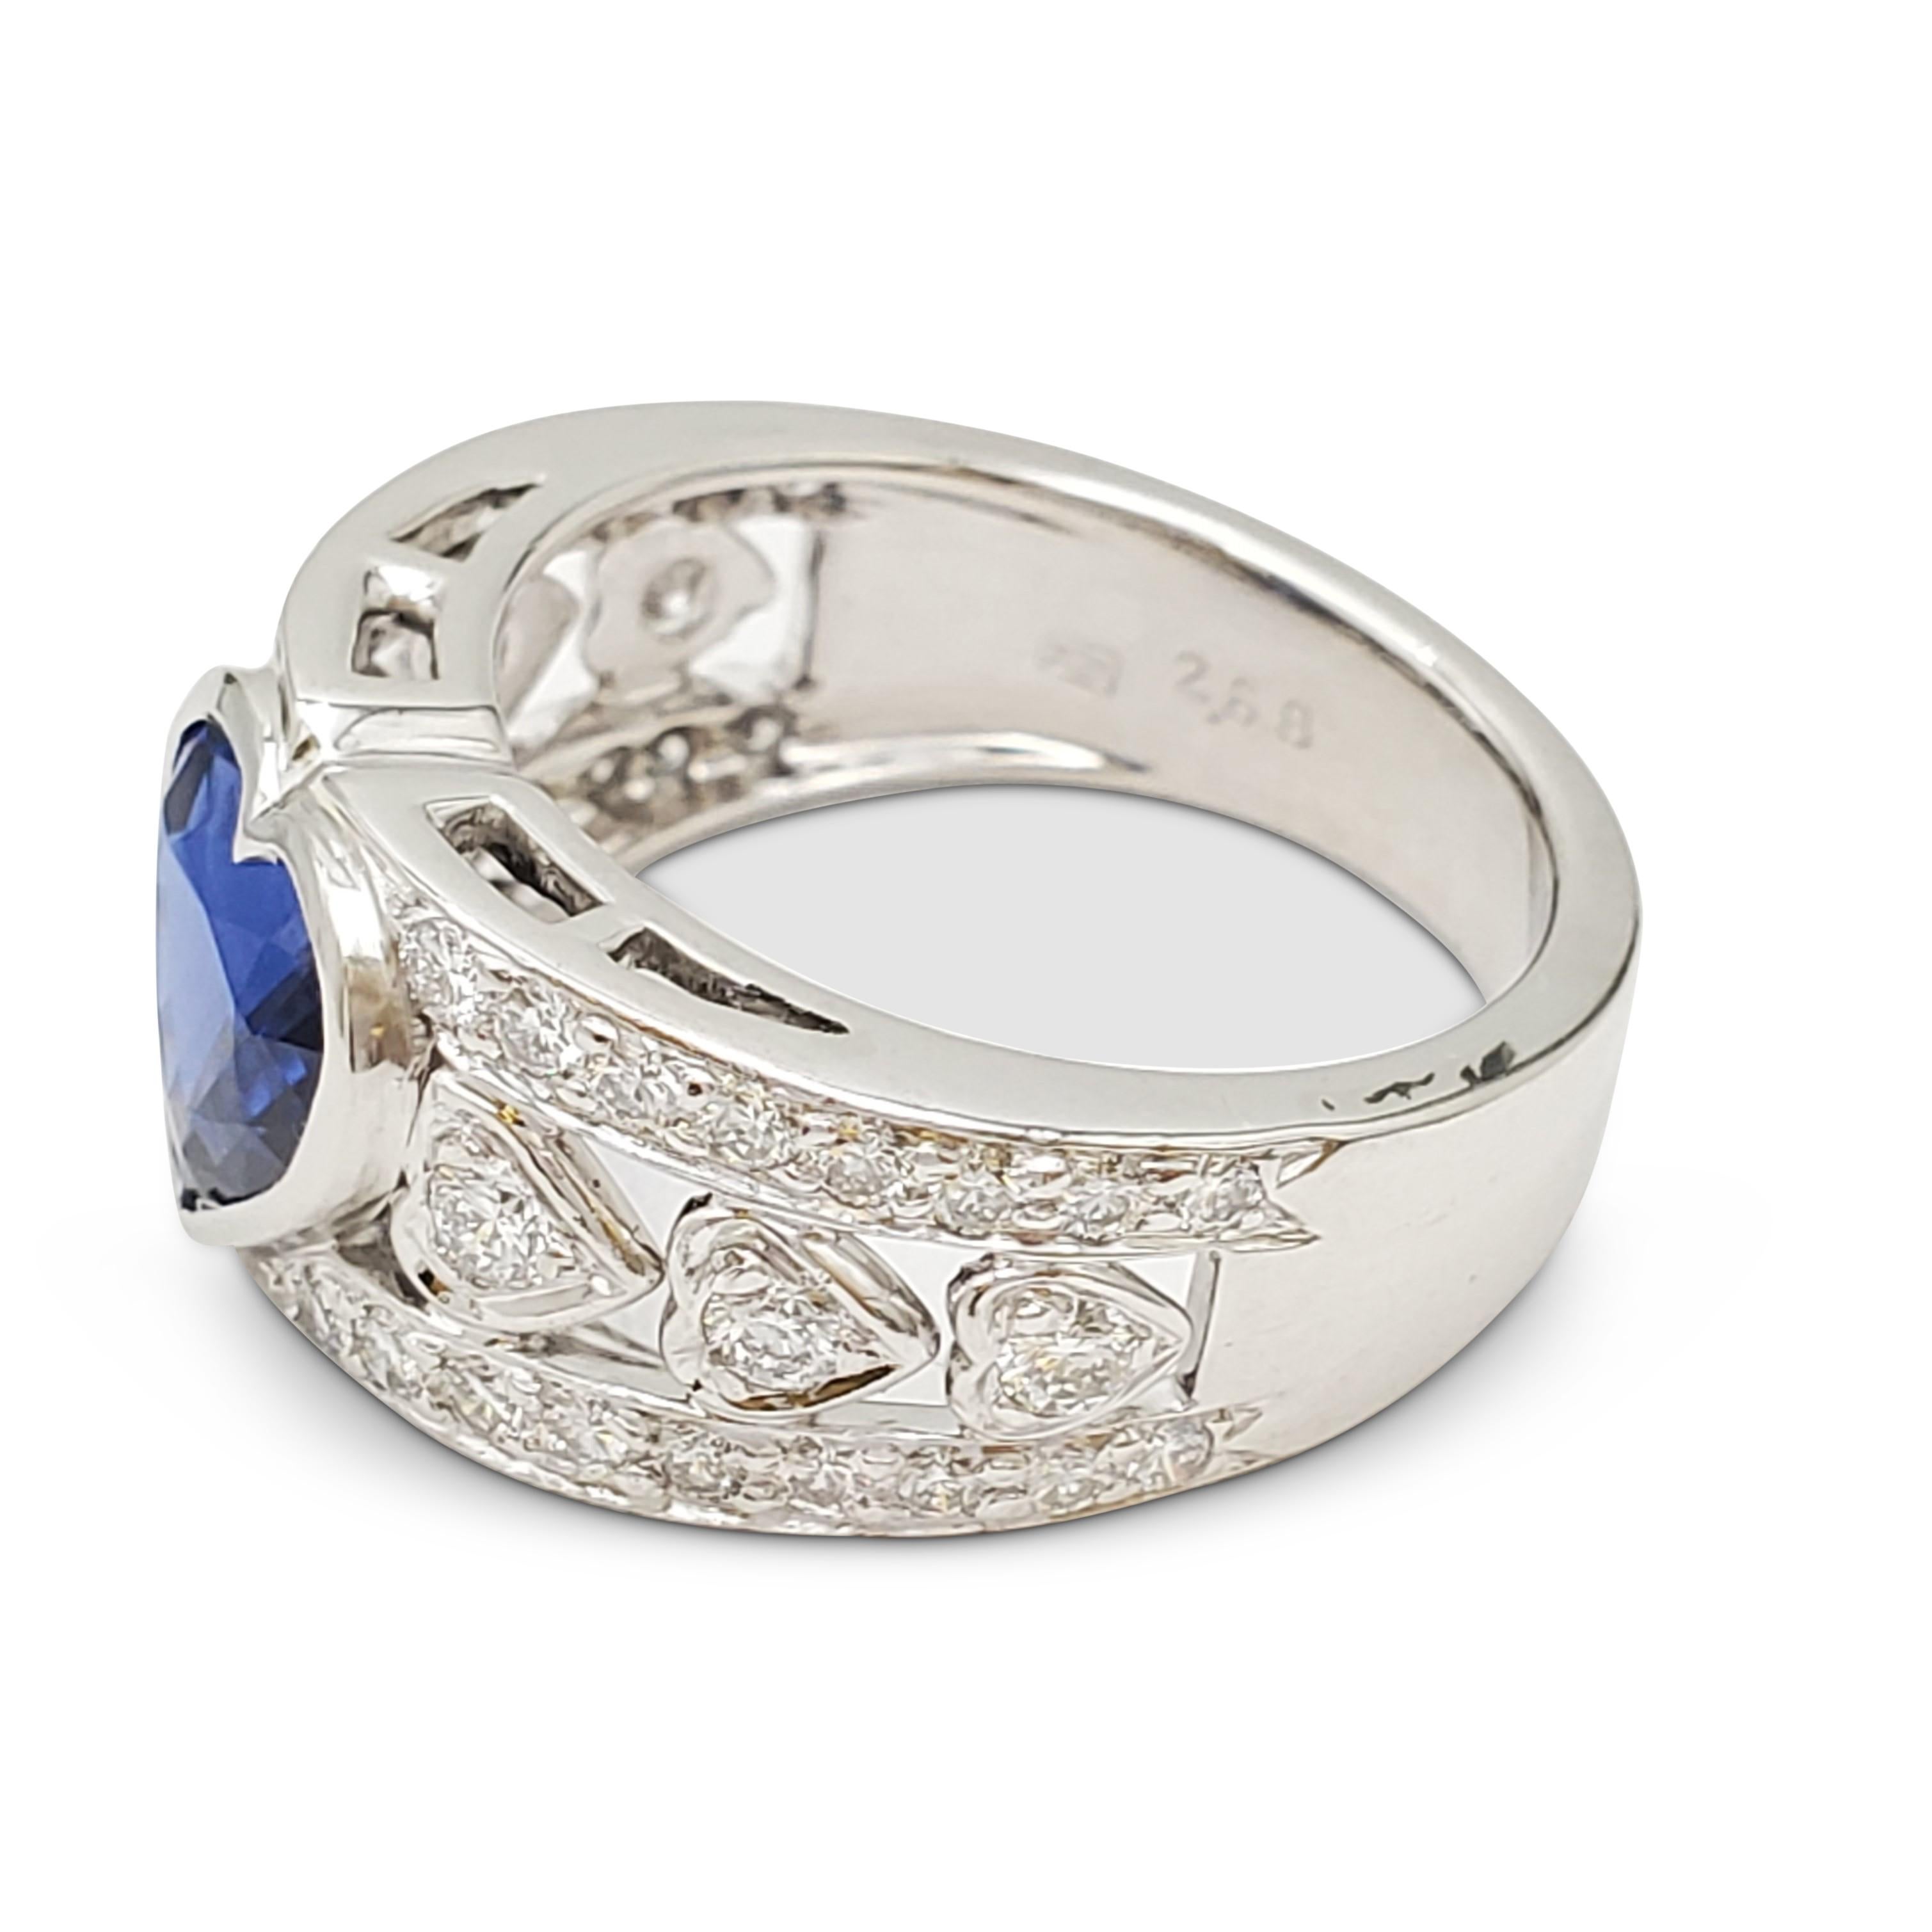 Authentic Harry Winston ring crafted in platinum centering on a heart-shaped sapphire weighing 2.65 carats. The openwork band is set with high-quality round brilliant cut diamonds weighing an estimated 0.78 carats total weight. Signed HW, PT950.